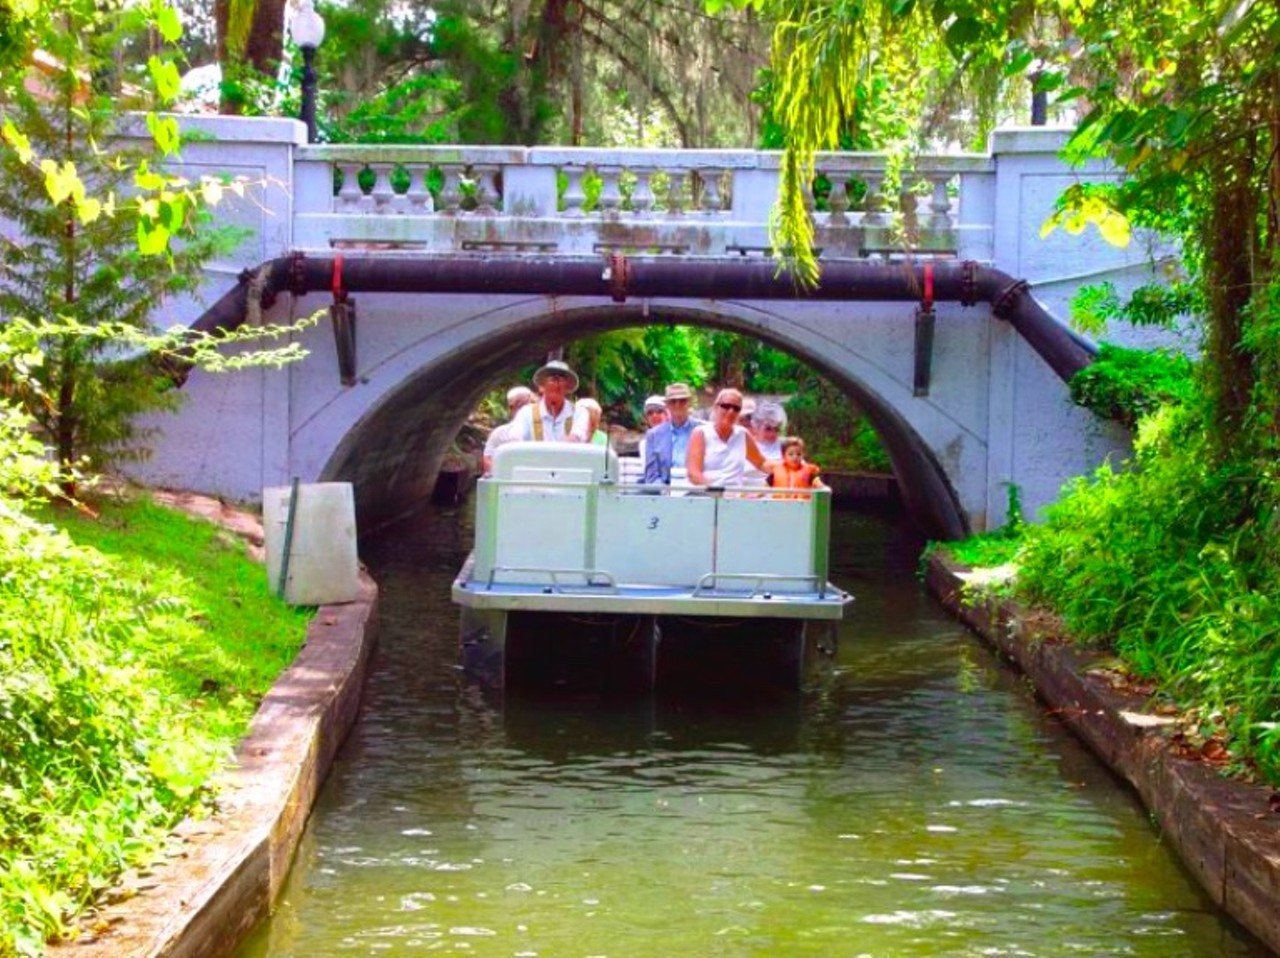 Take a Winter Park Scenic Boat Tour
It may not sound like the most thrilling activity to do around town, but these tours draw out crowds for a reason. Tourists and locals alike stand to learn something from these slow-traveling vessels and their brave, actually entertaining, guides. You'll get to see all the flora and fauna in the area, plus you'll get a front row seat to see the biggest, fanciest homes Winter Park has to offer. Learn a little, snoop a little — it's the perfect leisurely activity.